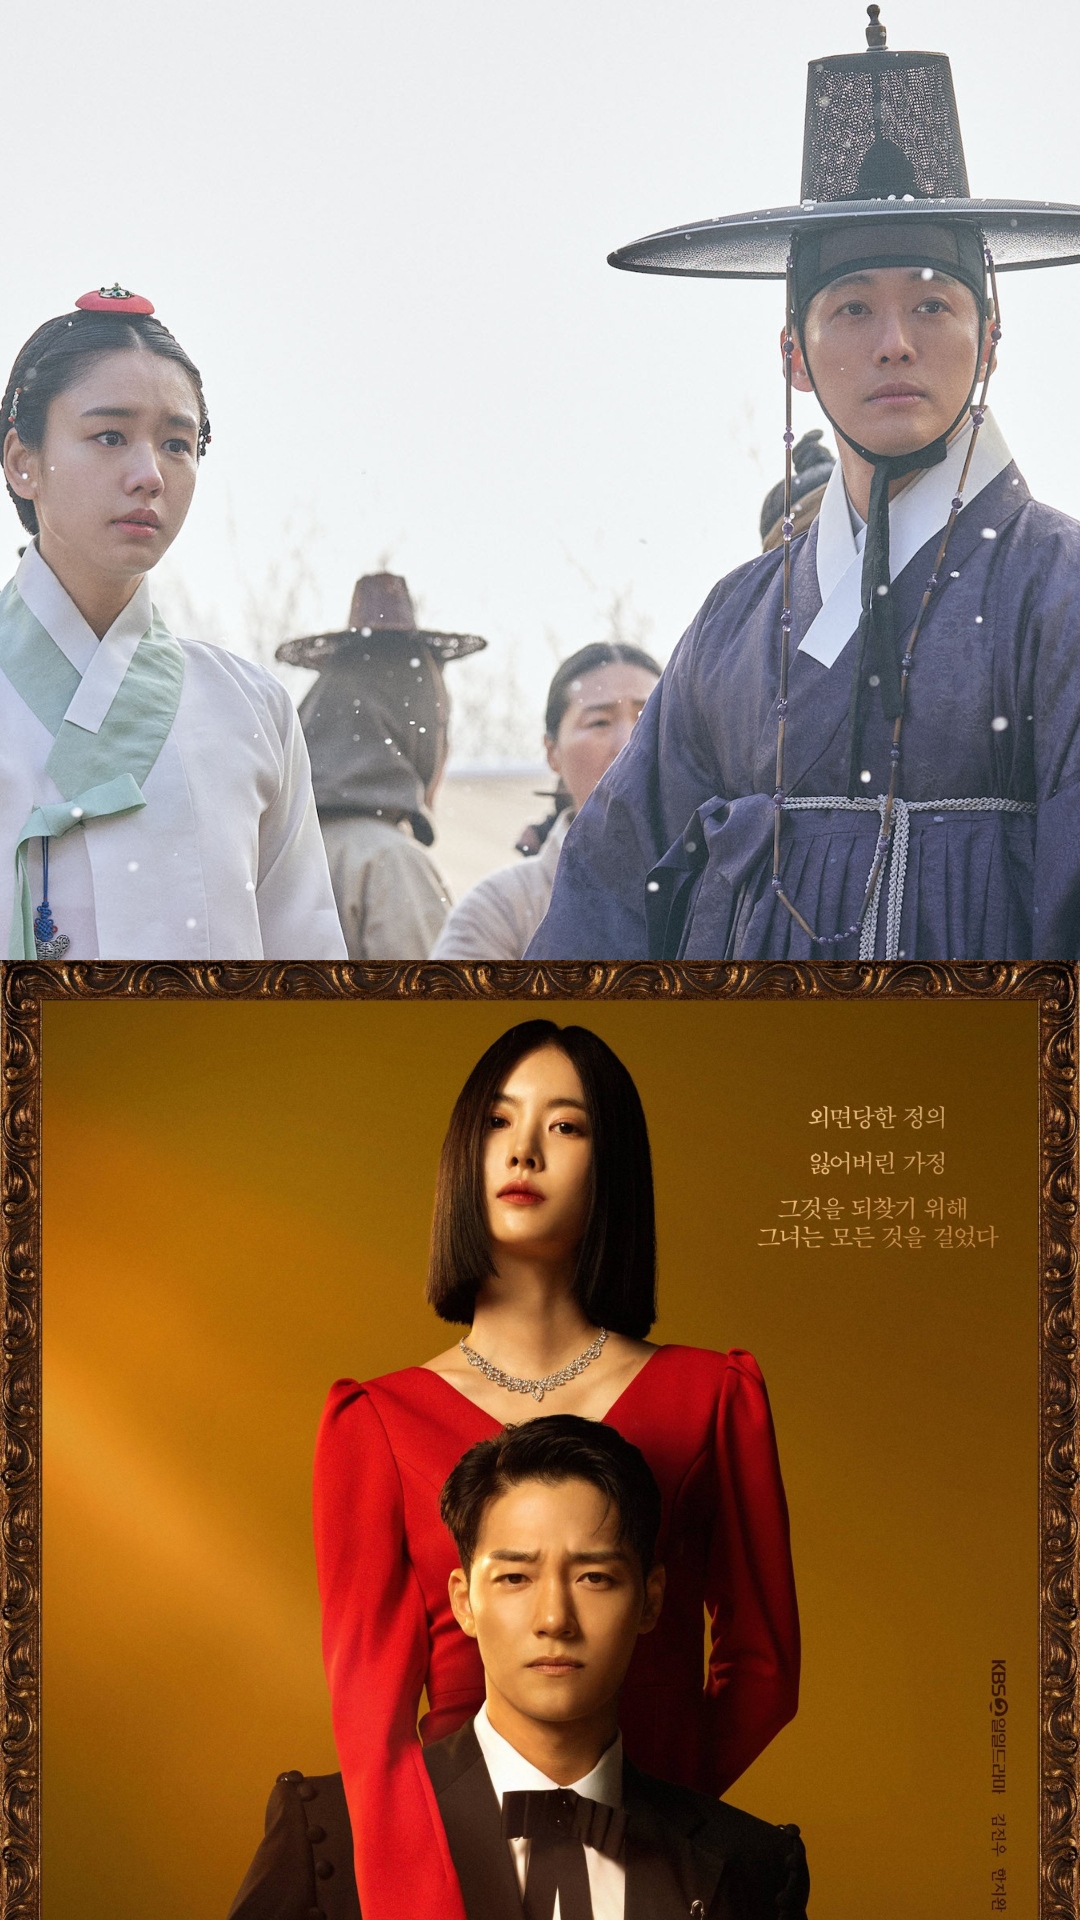 My Dearest to Elegant Empire: K-Dramas need to be checked out in August 